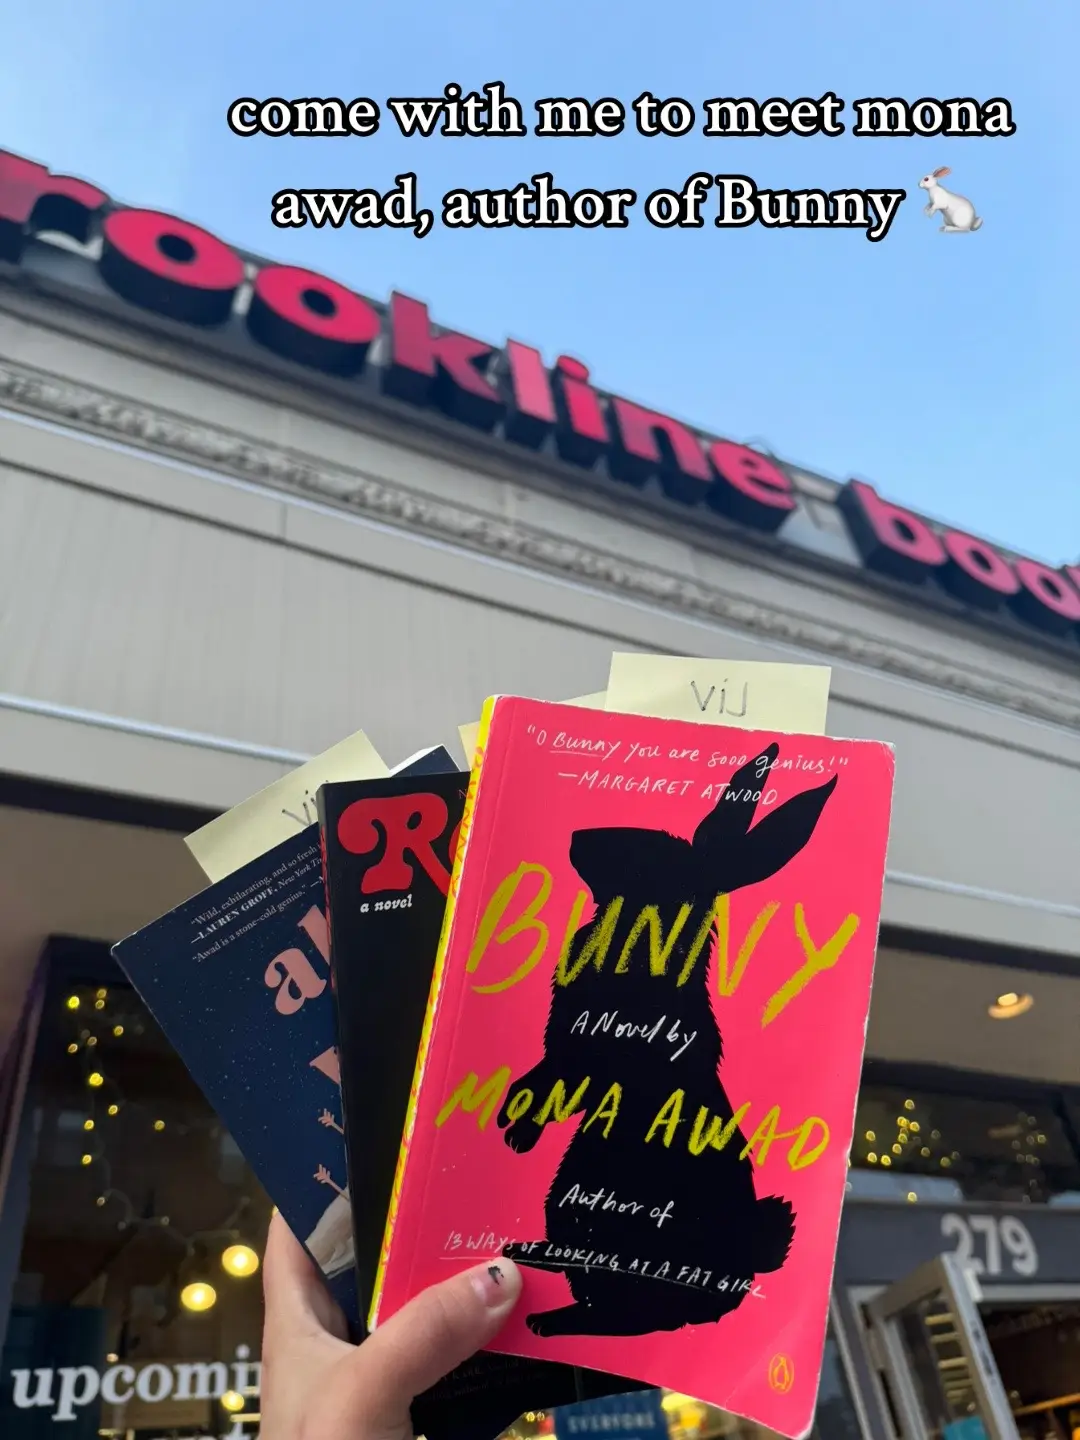 a wonderful opportunity! i loved getting to hear her talk during the Q&A— what an incredible writer #monaawad #monaawadbunny #booksigning #boston 